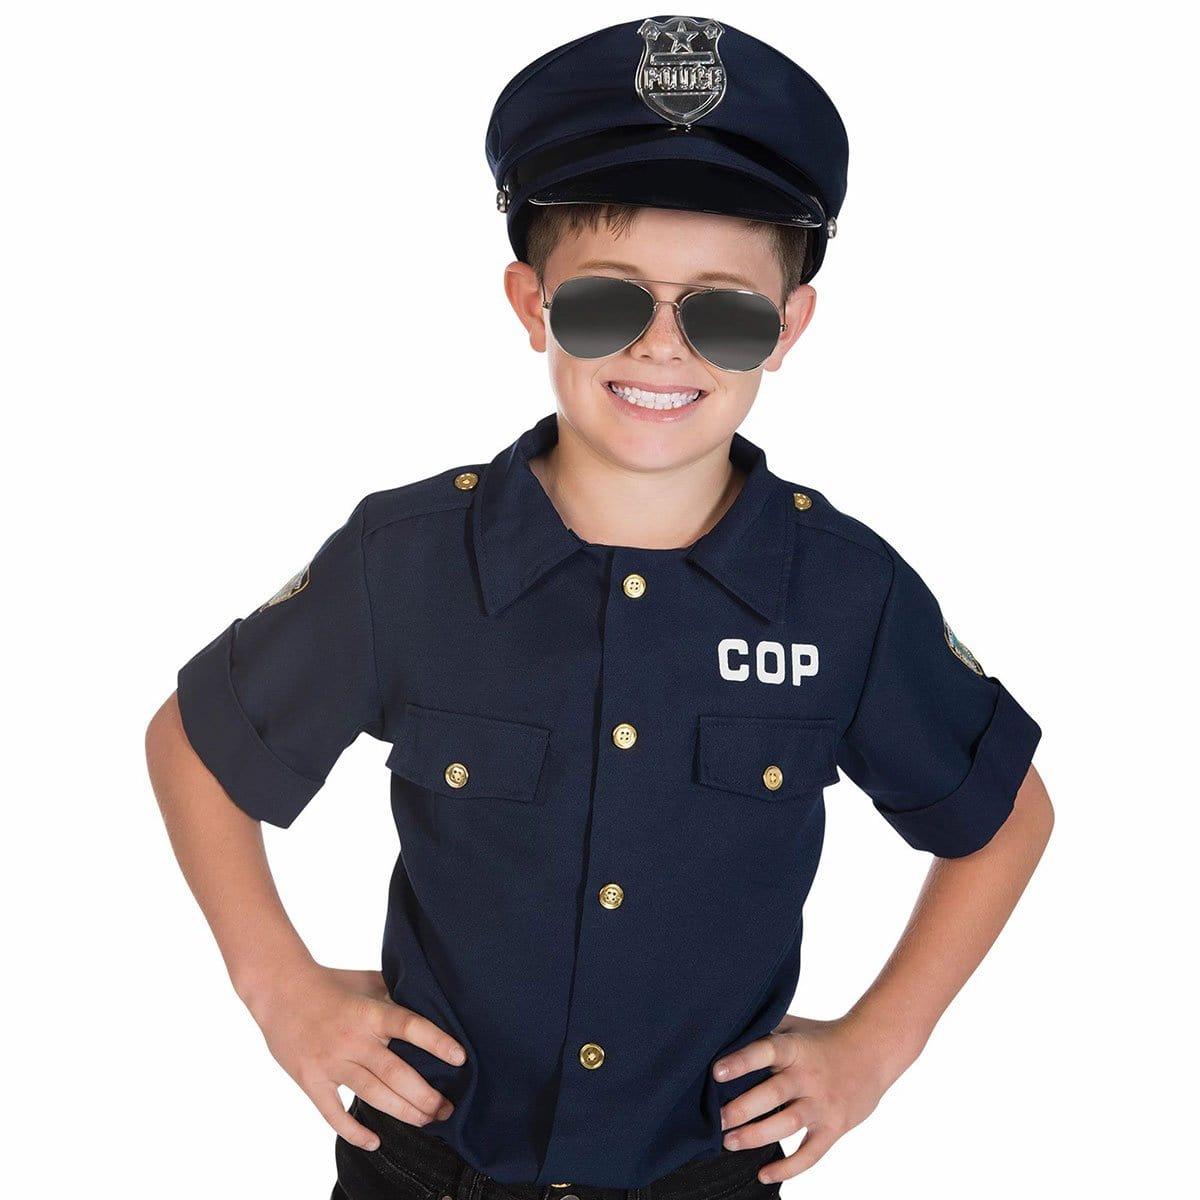 Buy Costume Accessories Police Mirror Sunglasses for Kids sold at Party Expert